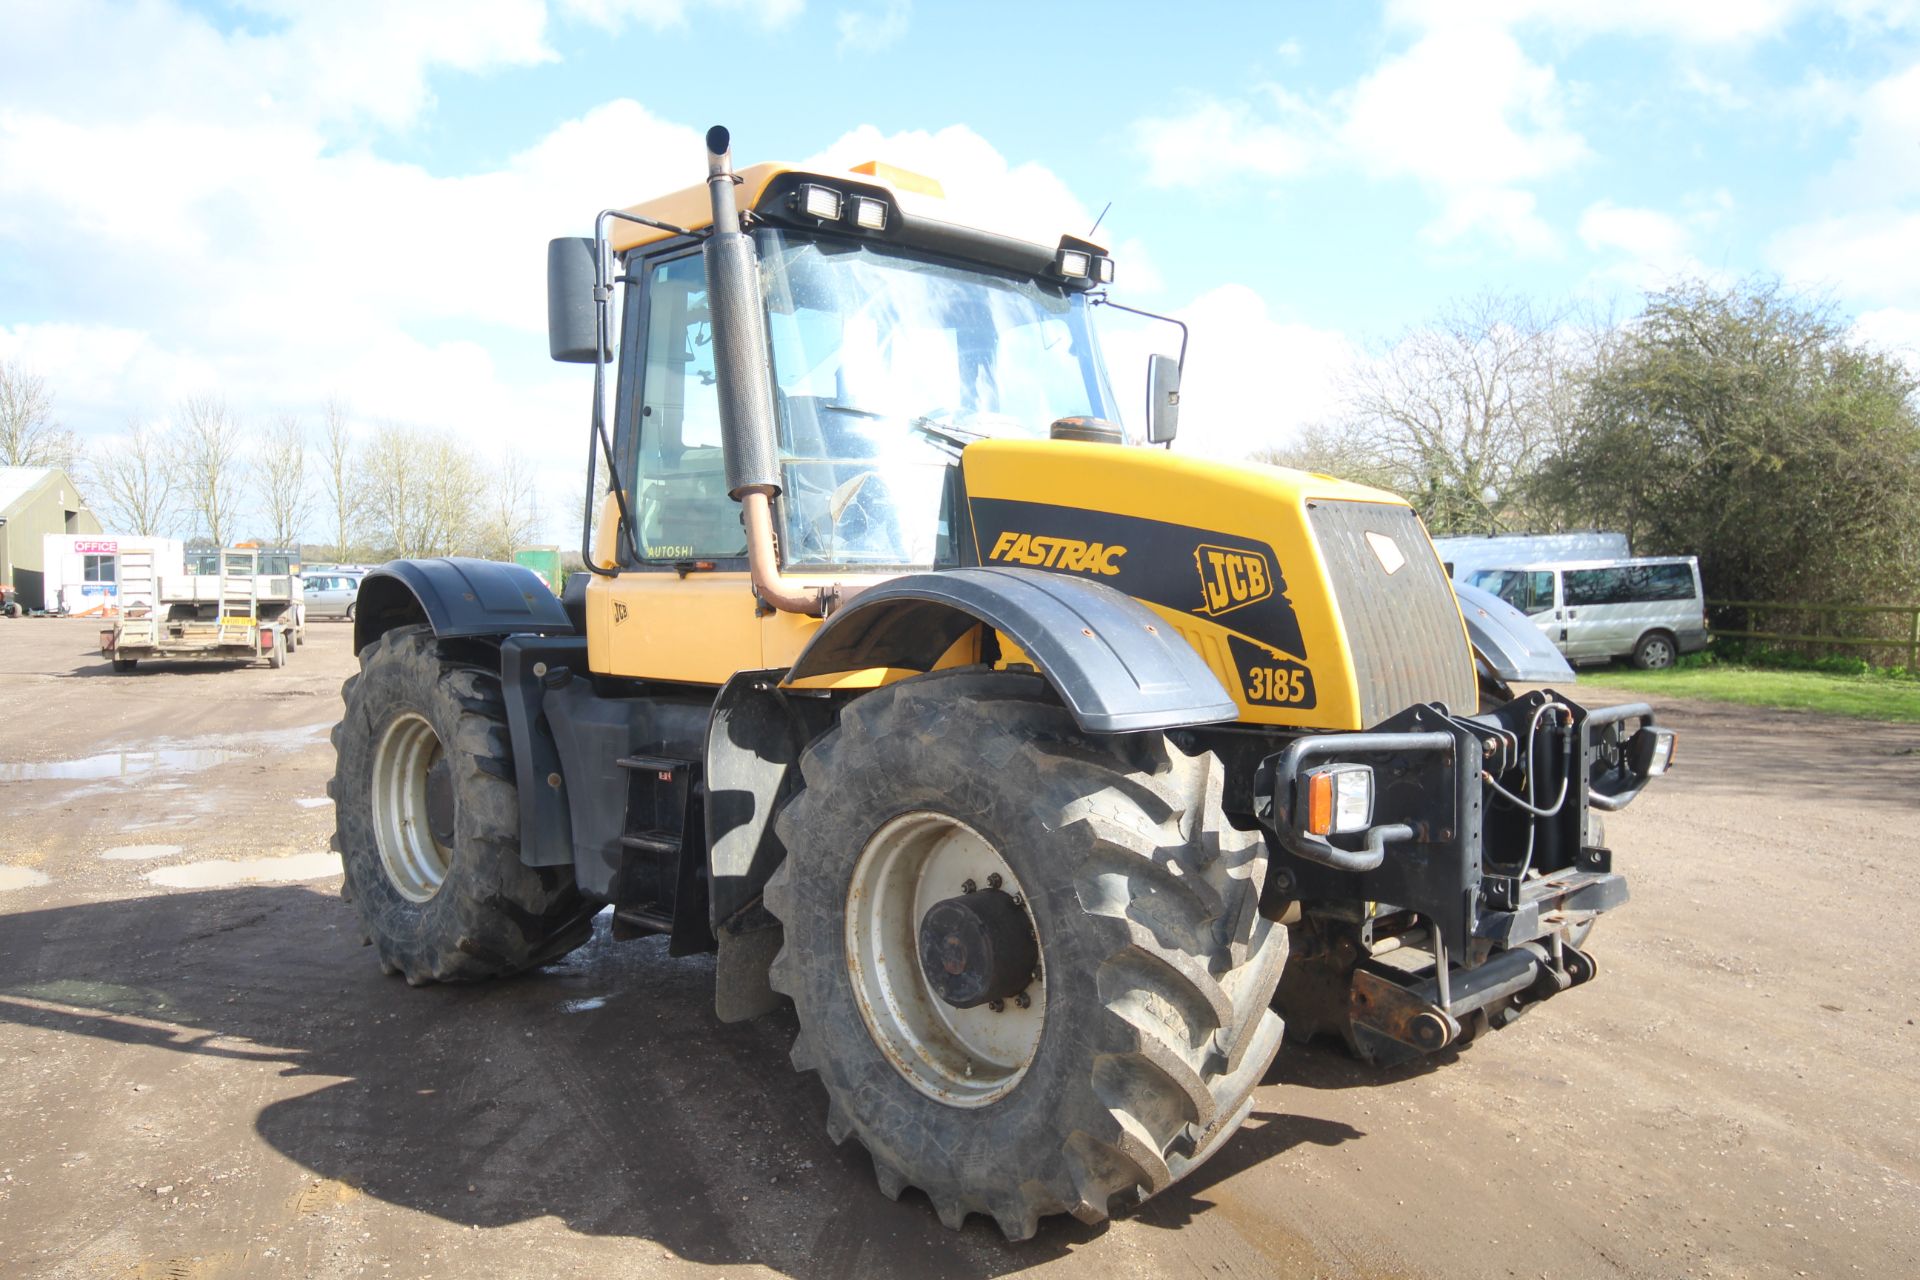 JCB Fastrac 3185 Autoshift 4WD tractor. Registration X642 AHT. Date of first registration 04/09/ - Image 7 of 71